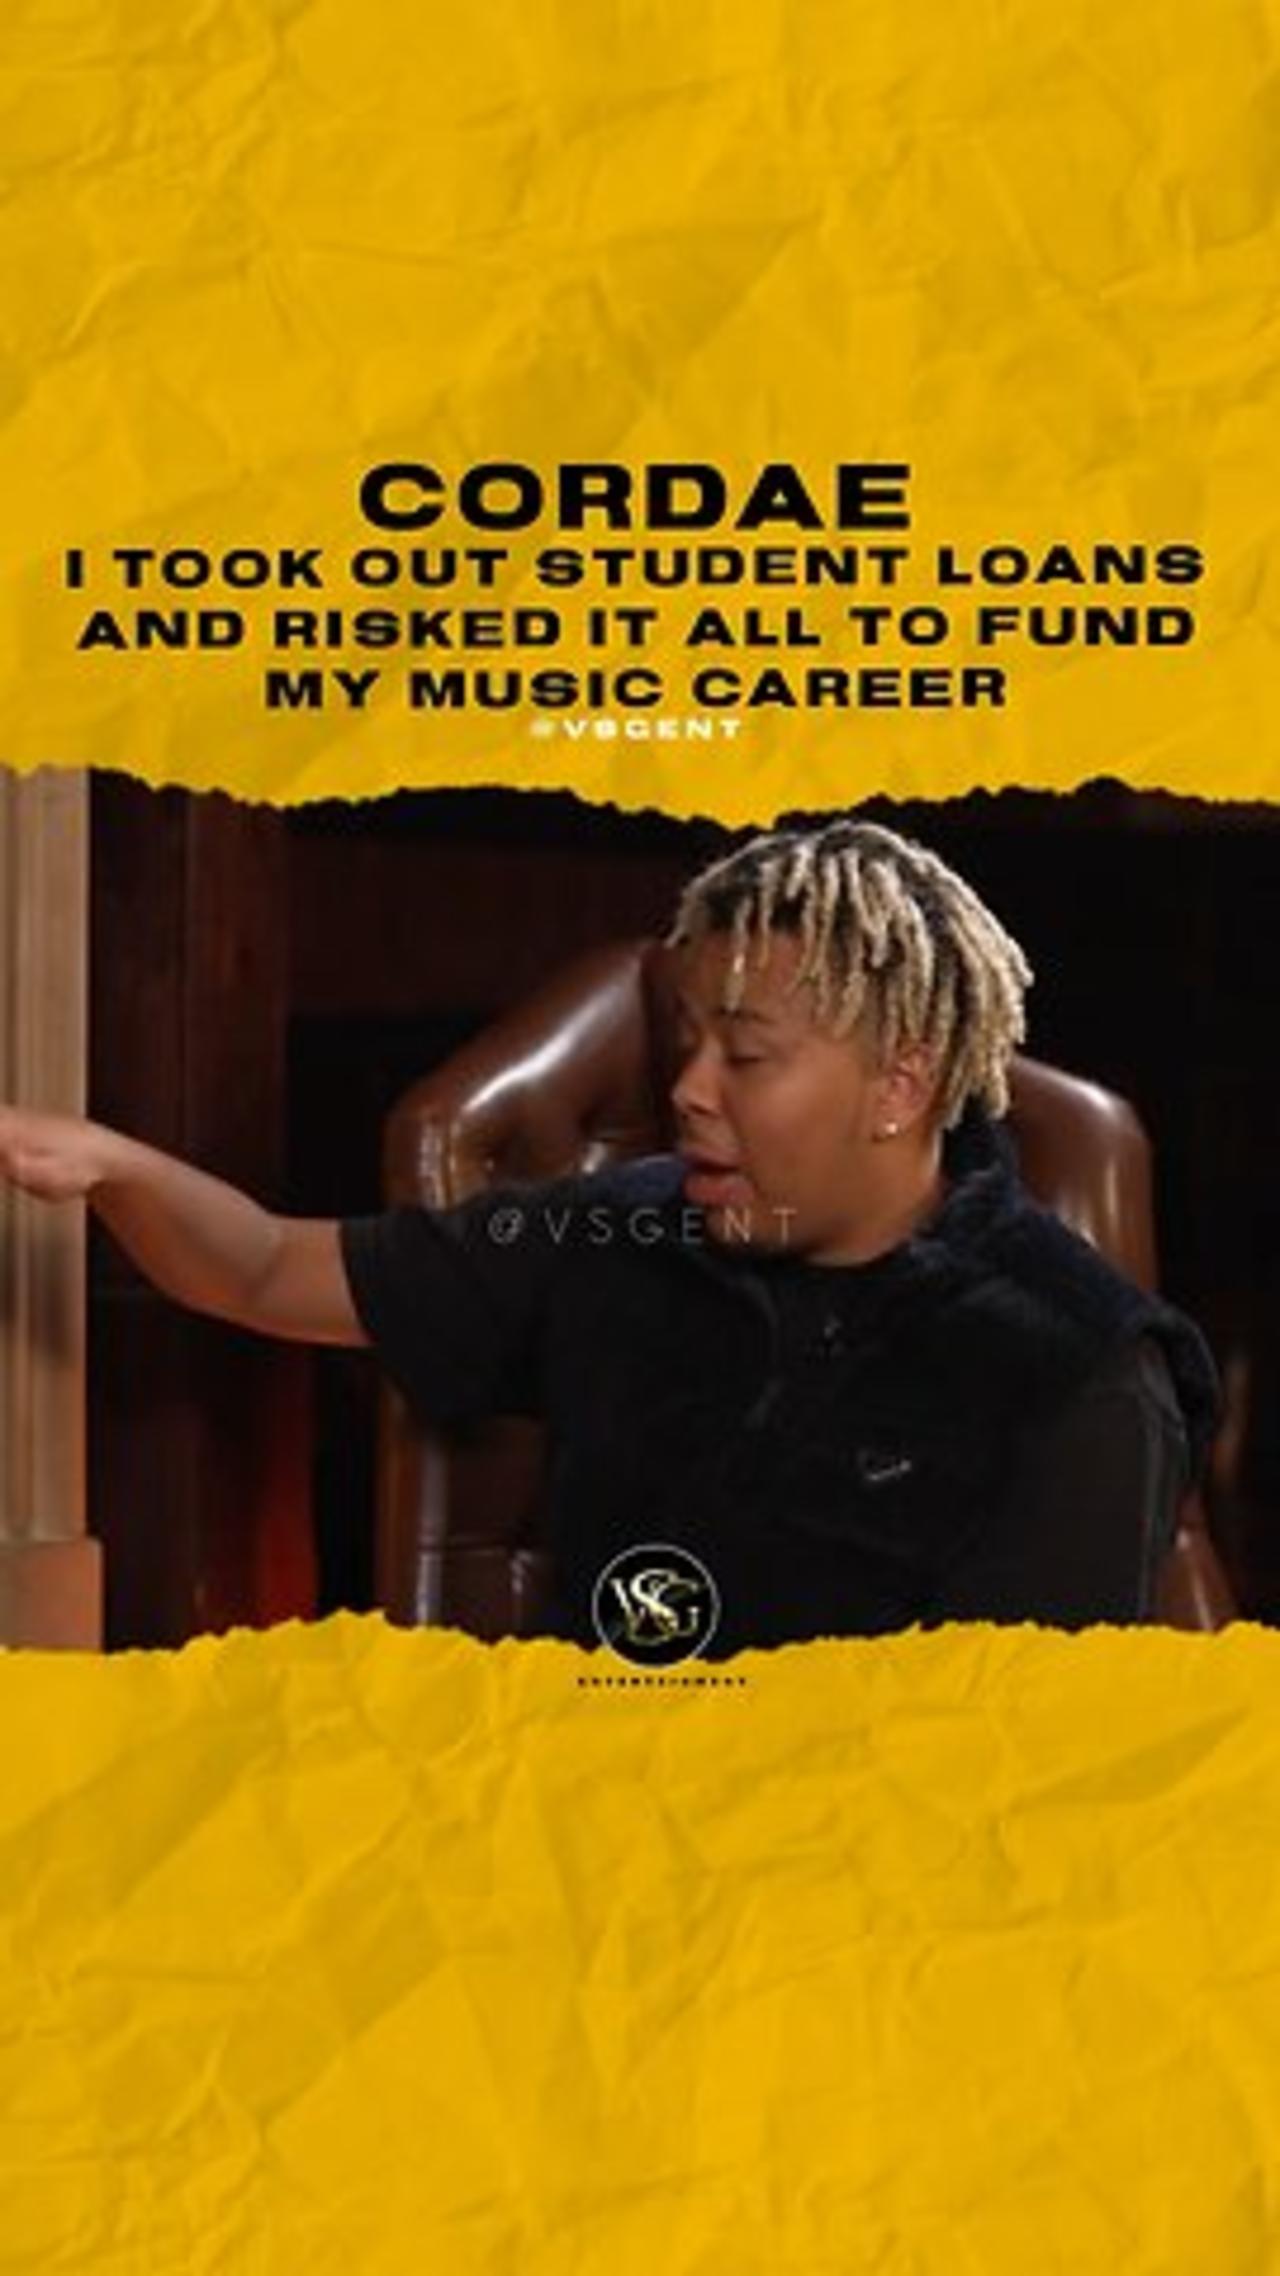 I took out student loans and risked it all to fund my music career